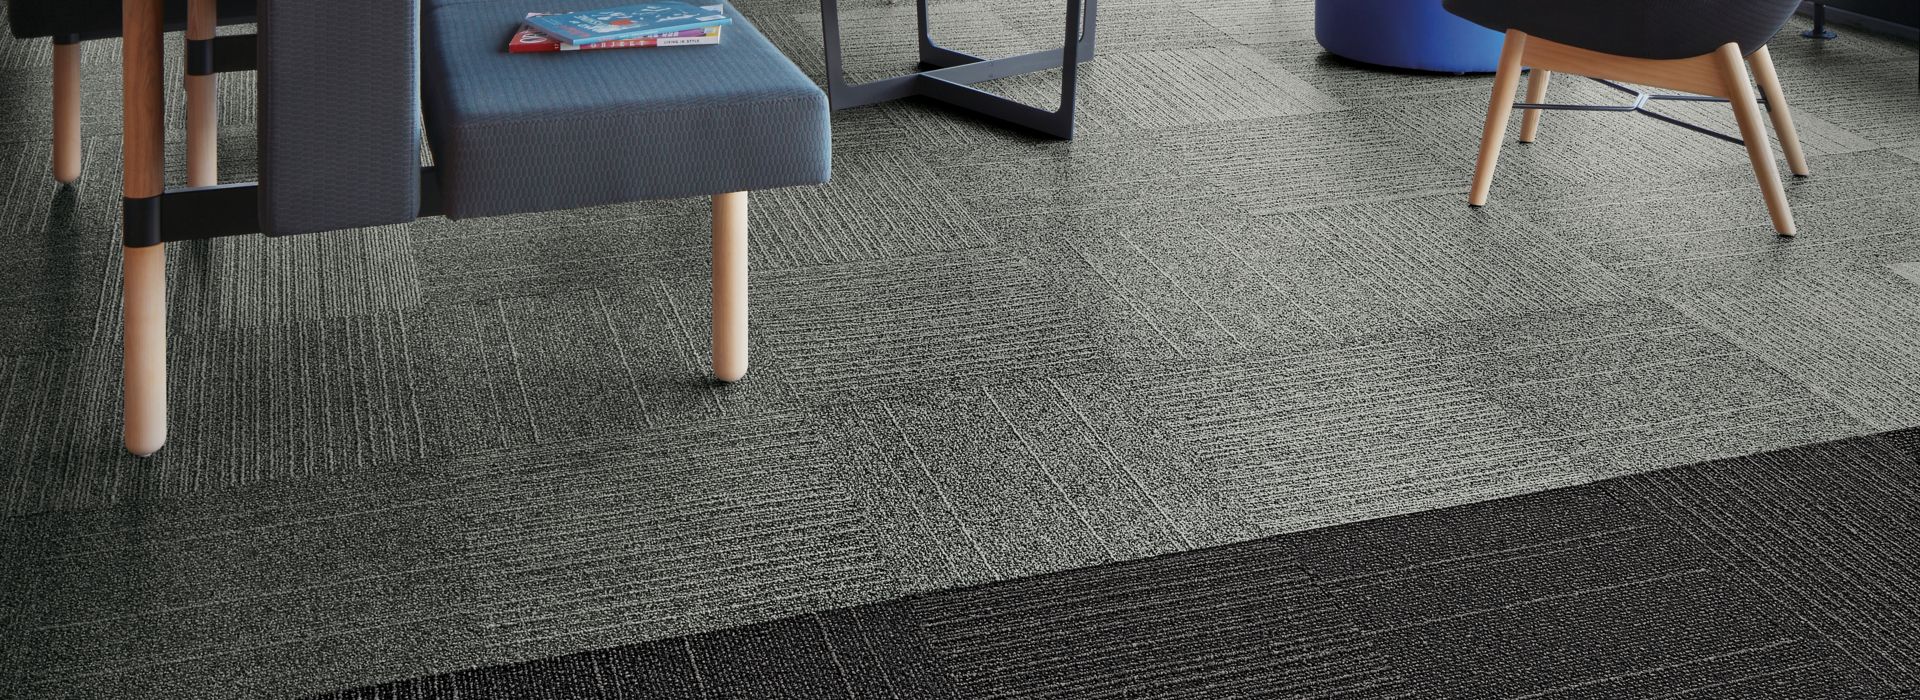 Interface Open Air 423 carpet tile in social space with blue seating and floor to ceiling windows image number 1